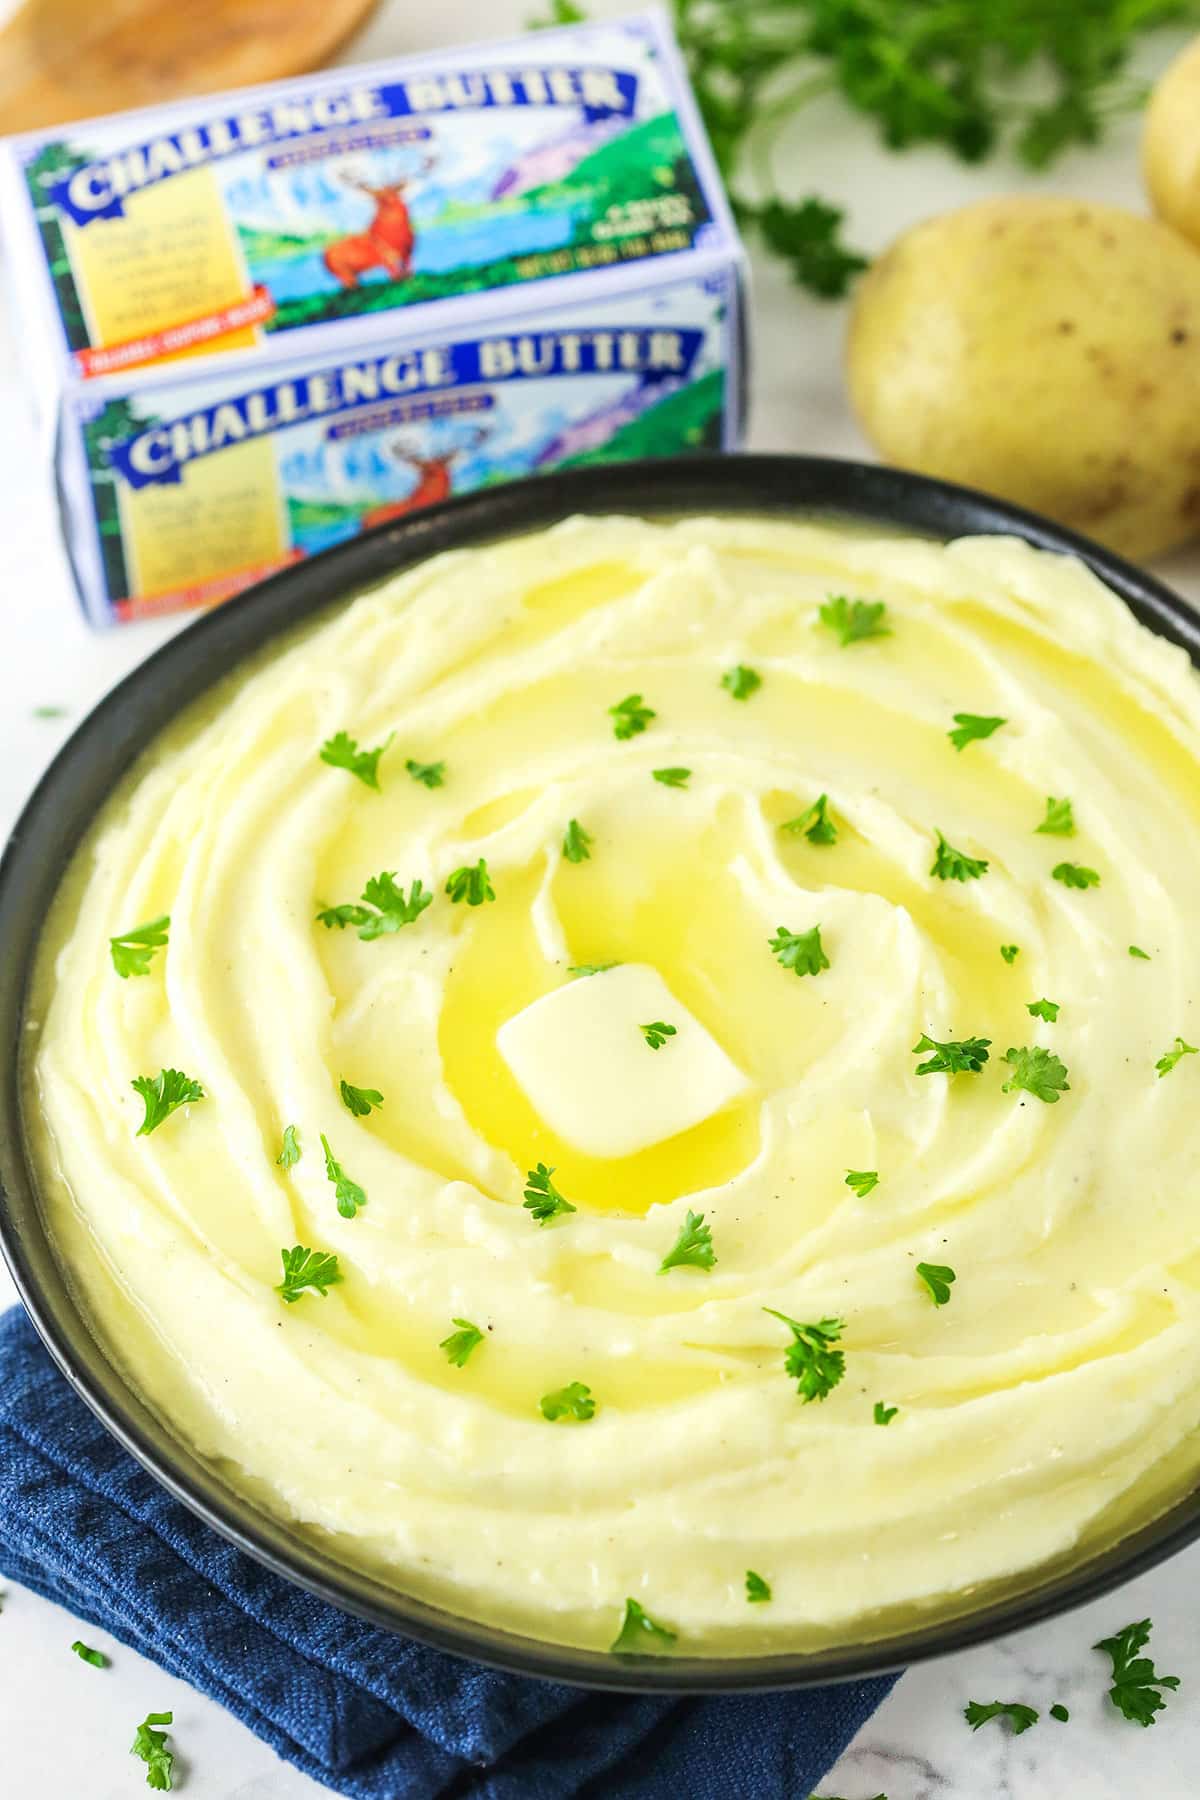 mashed potatoes with butter package in background